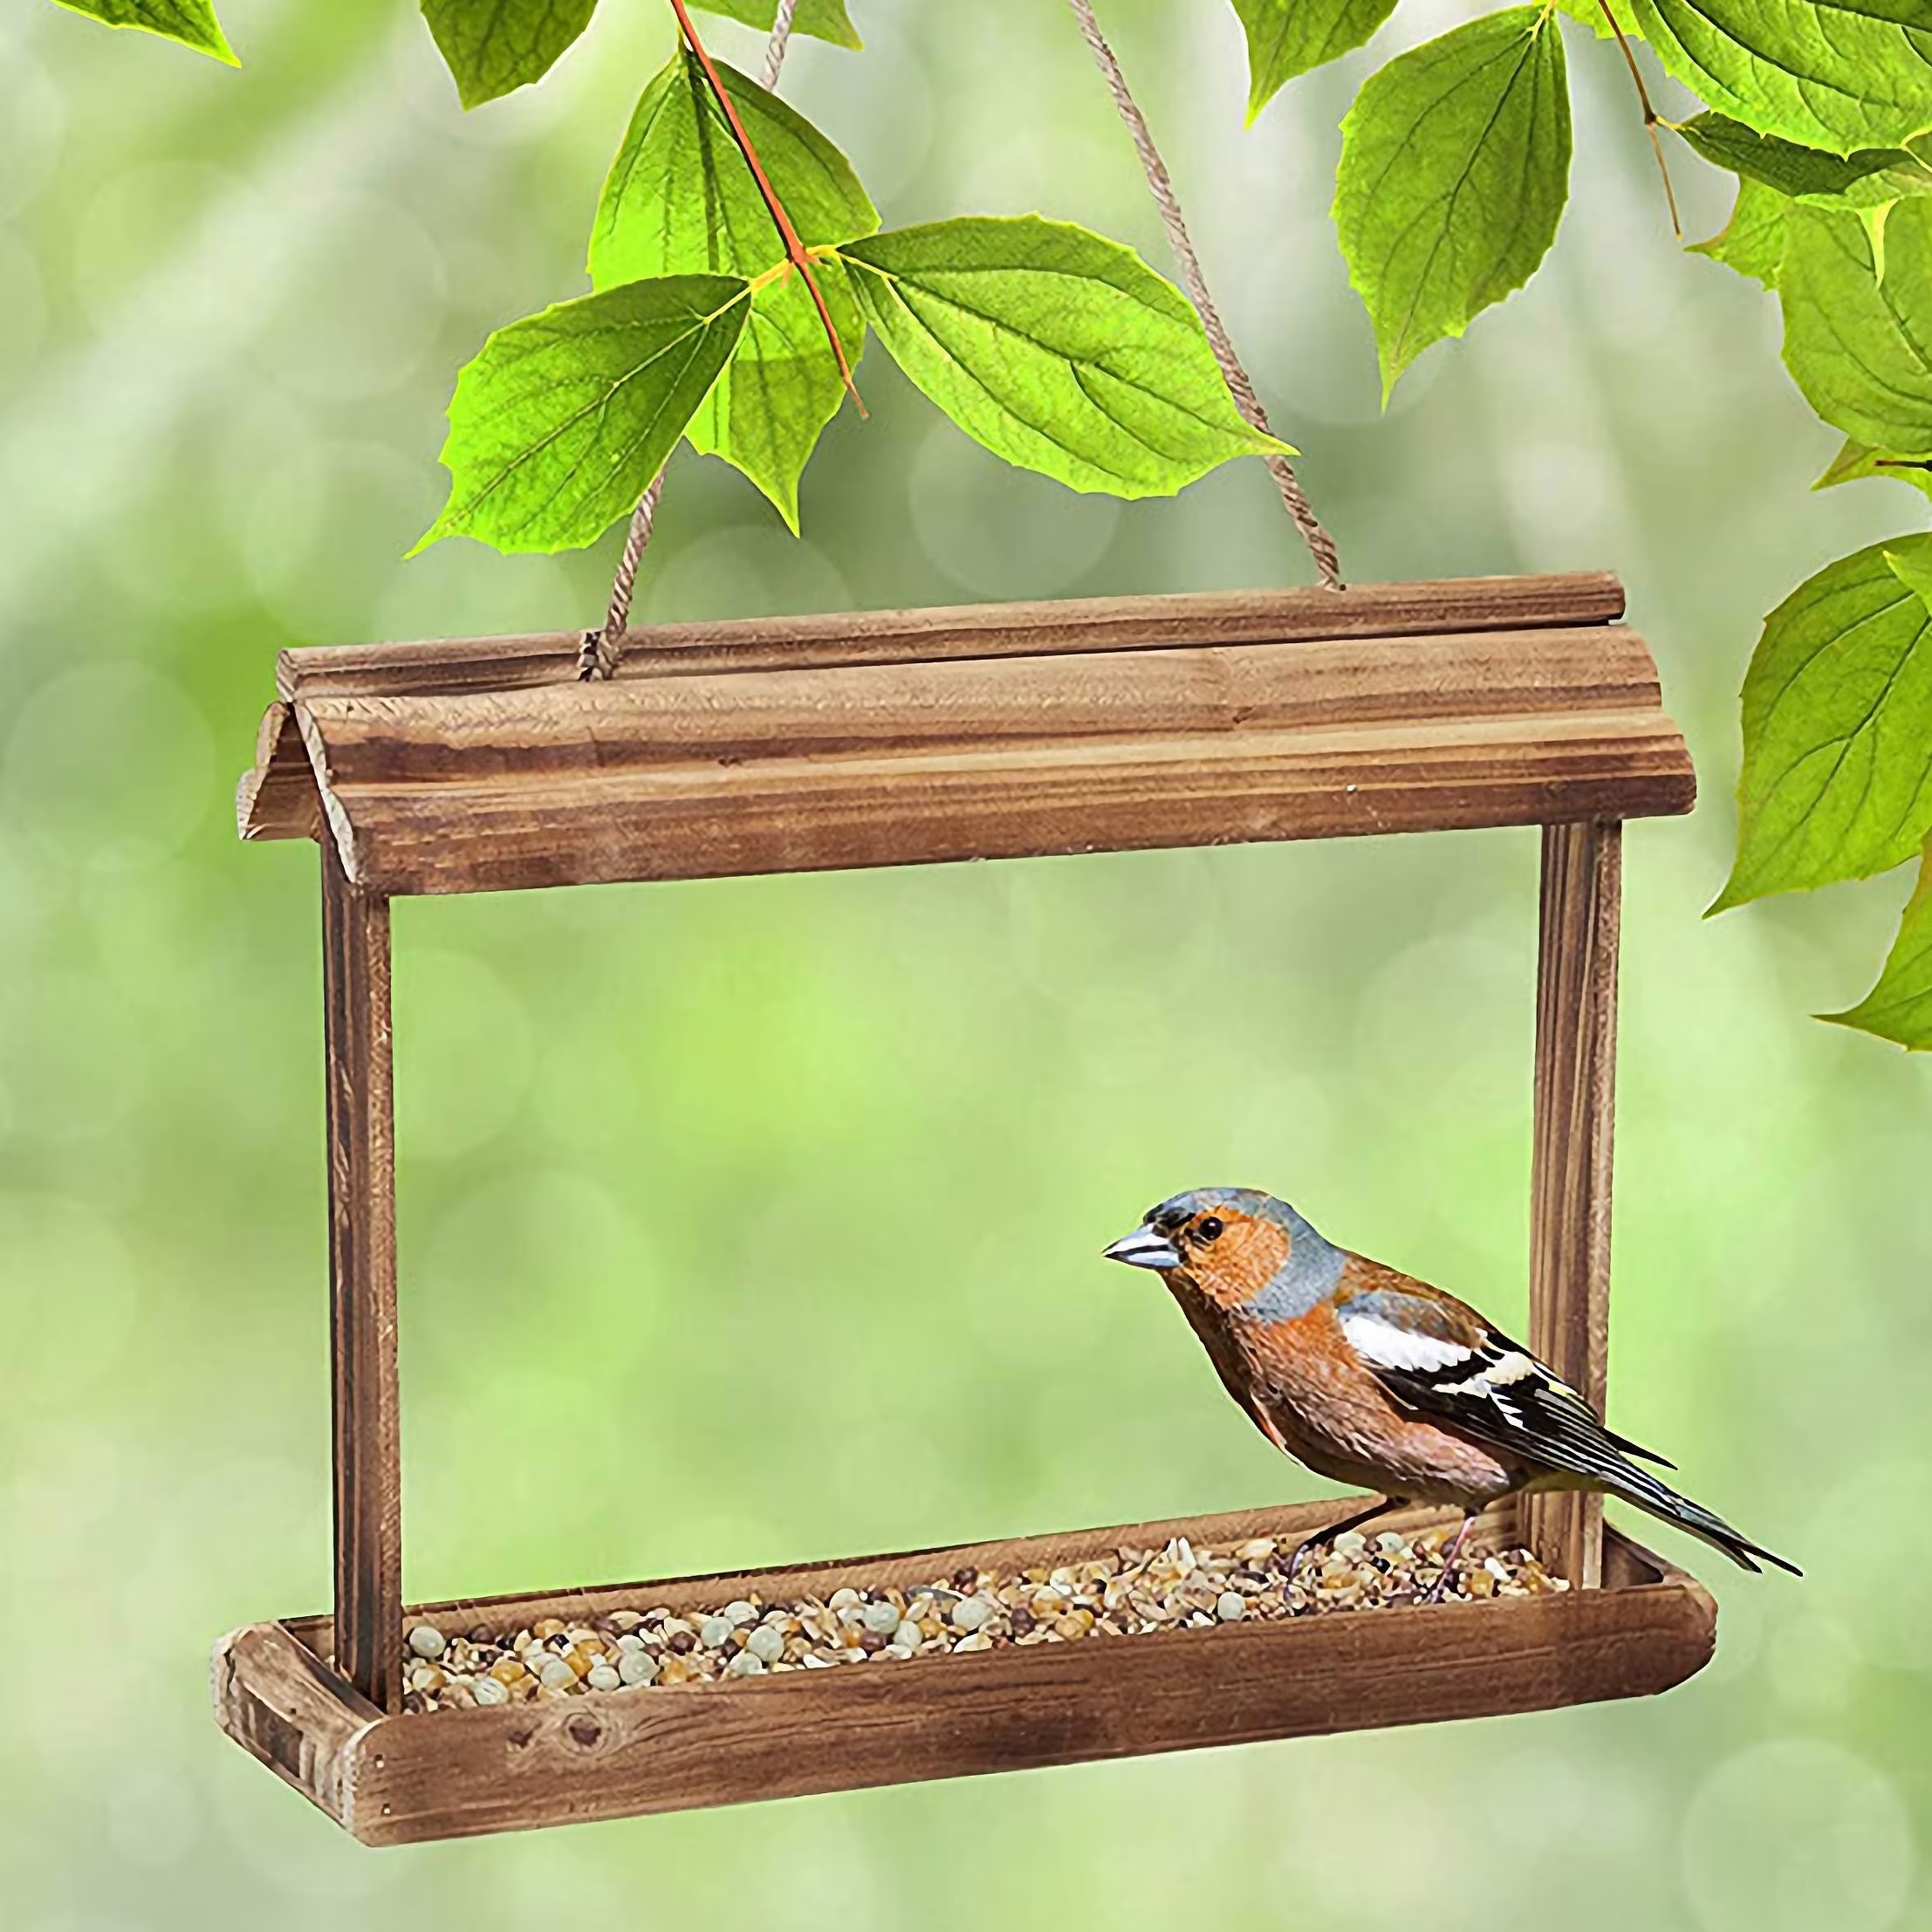 Personalized Bird Seed Design